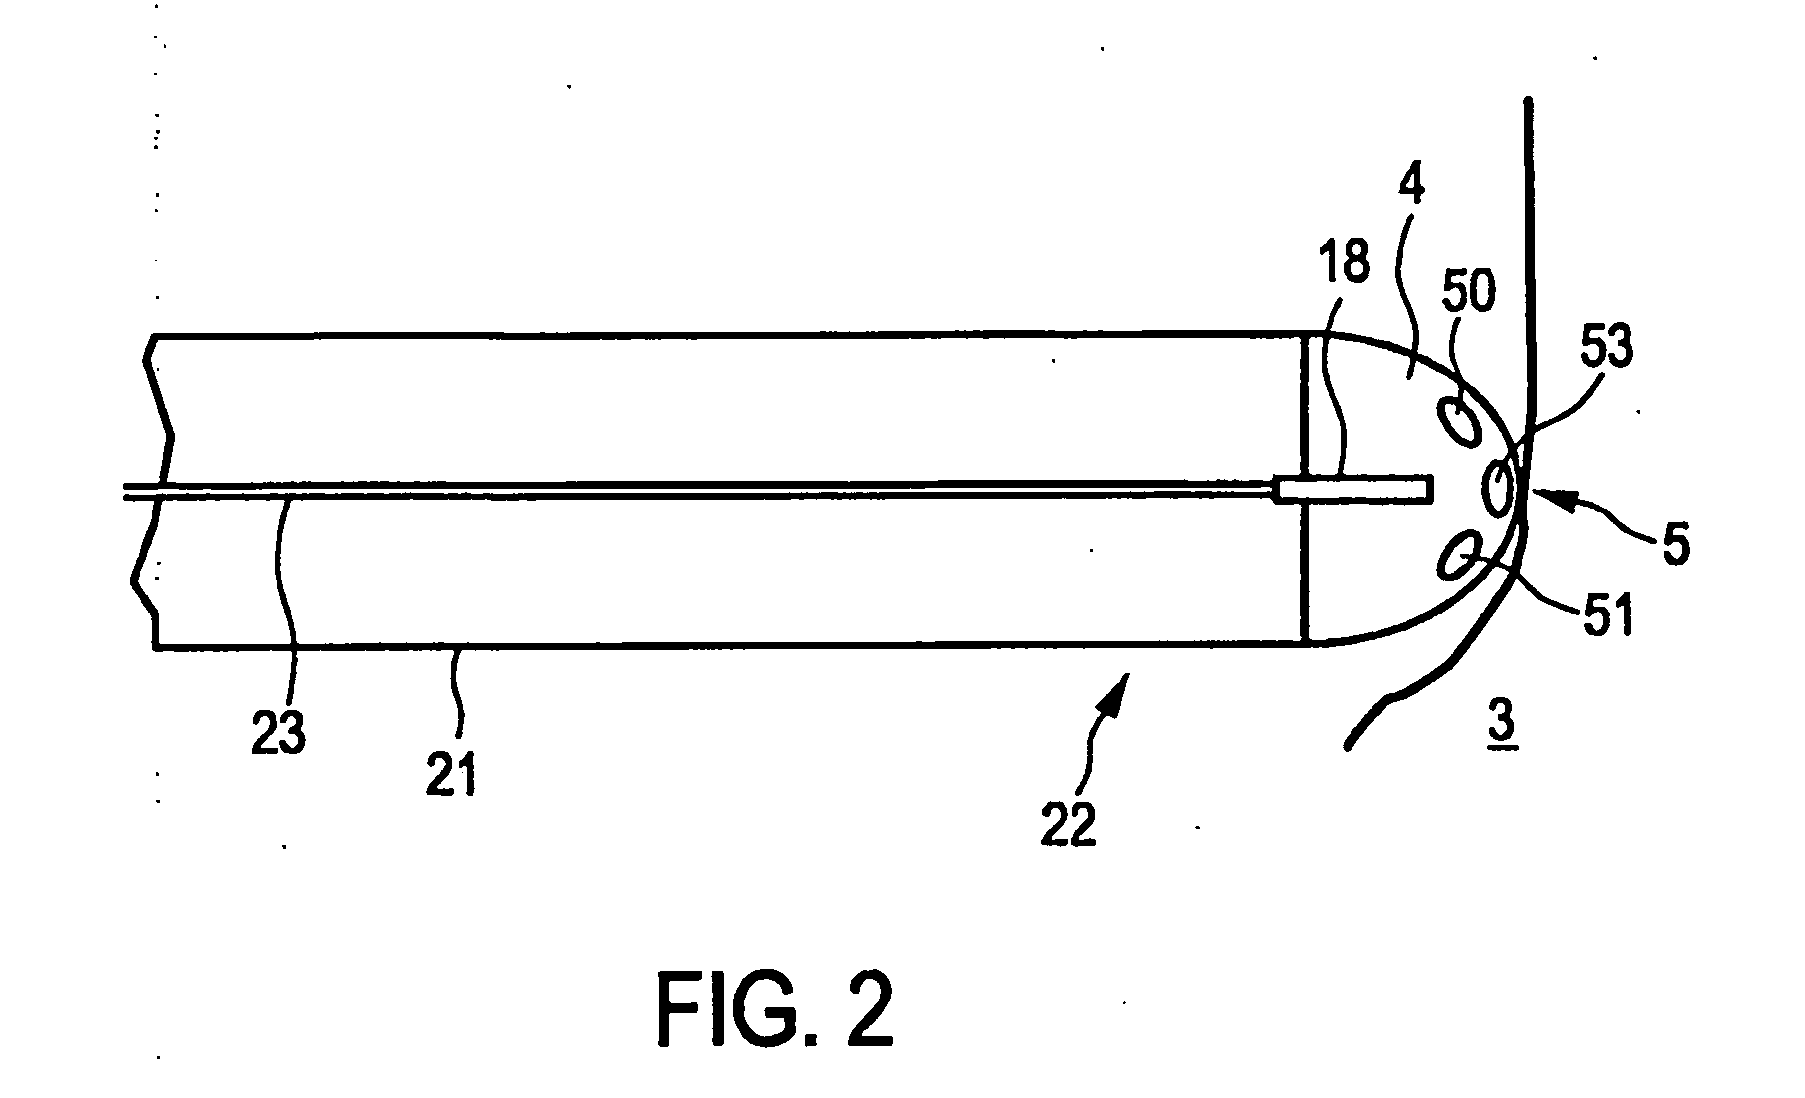 Property determining apparatus for determining a property of an object